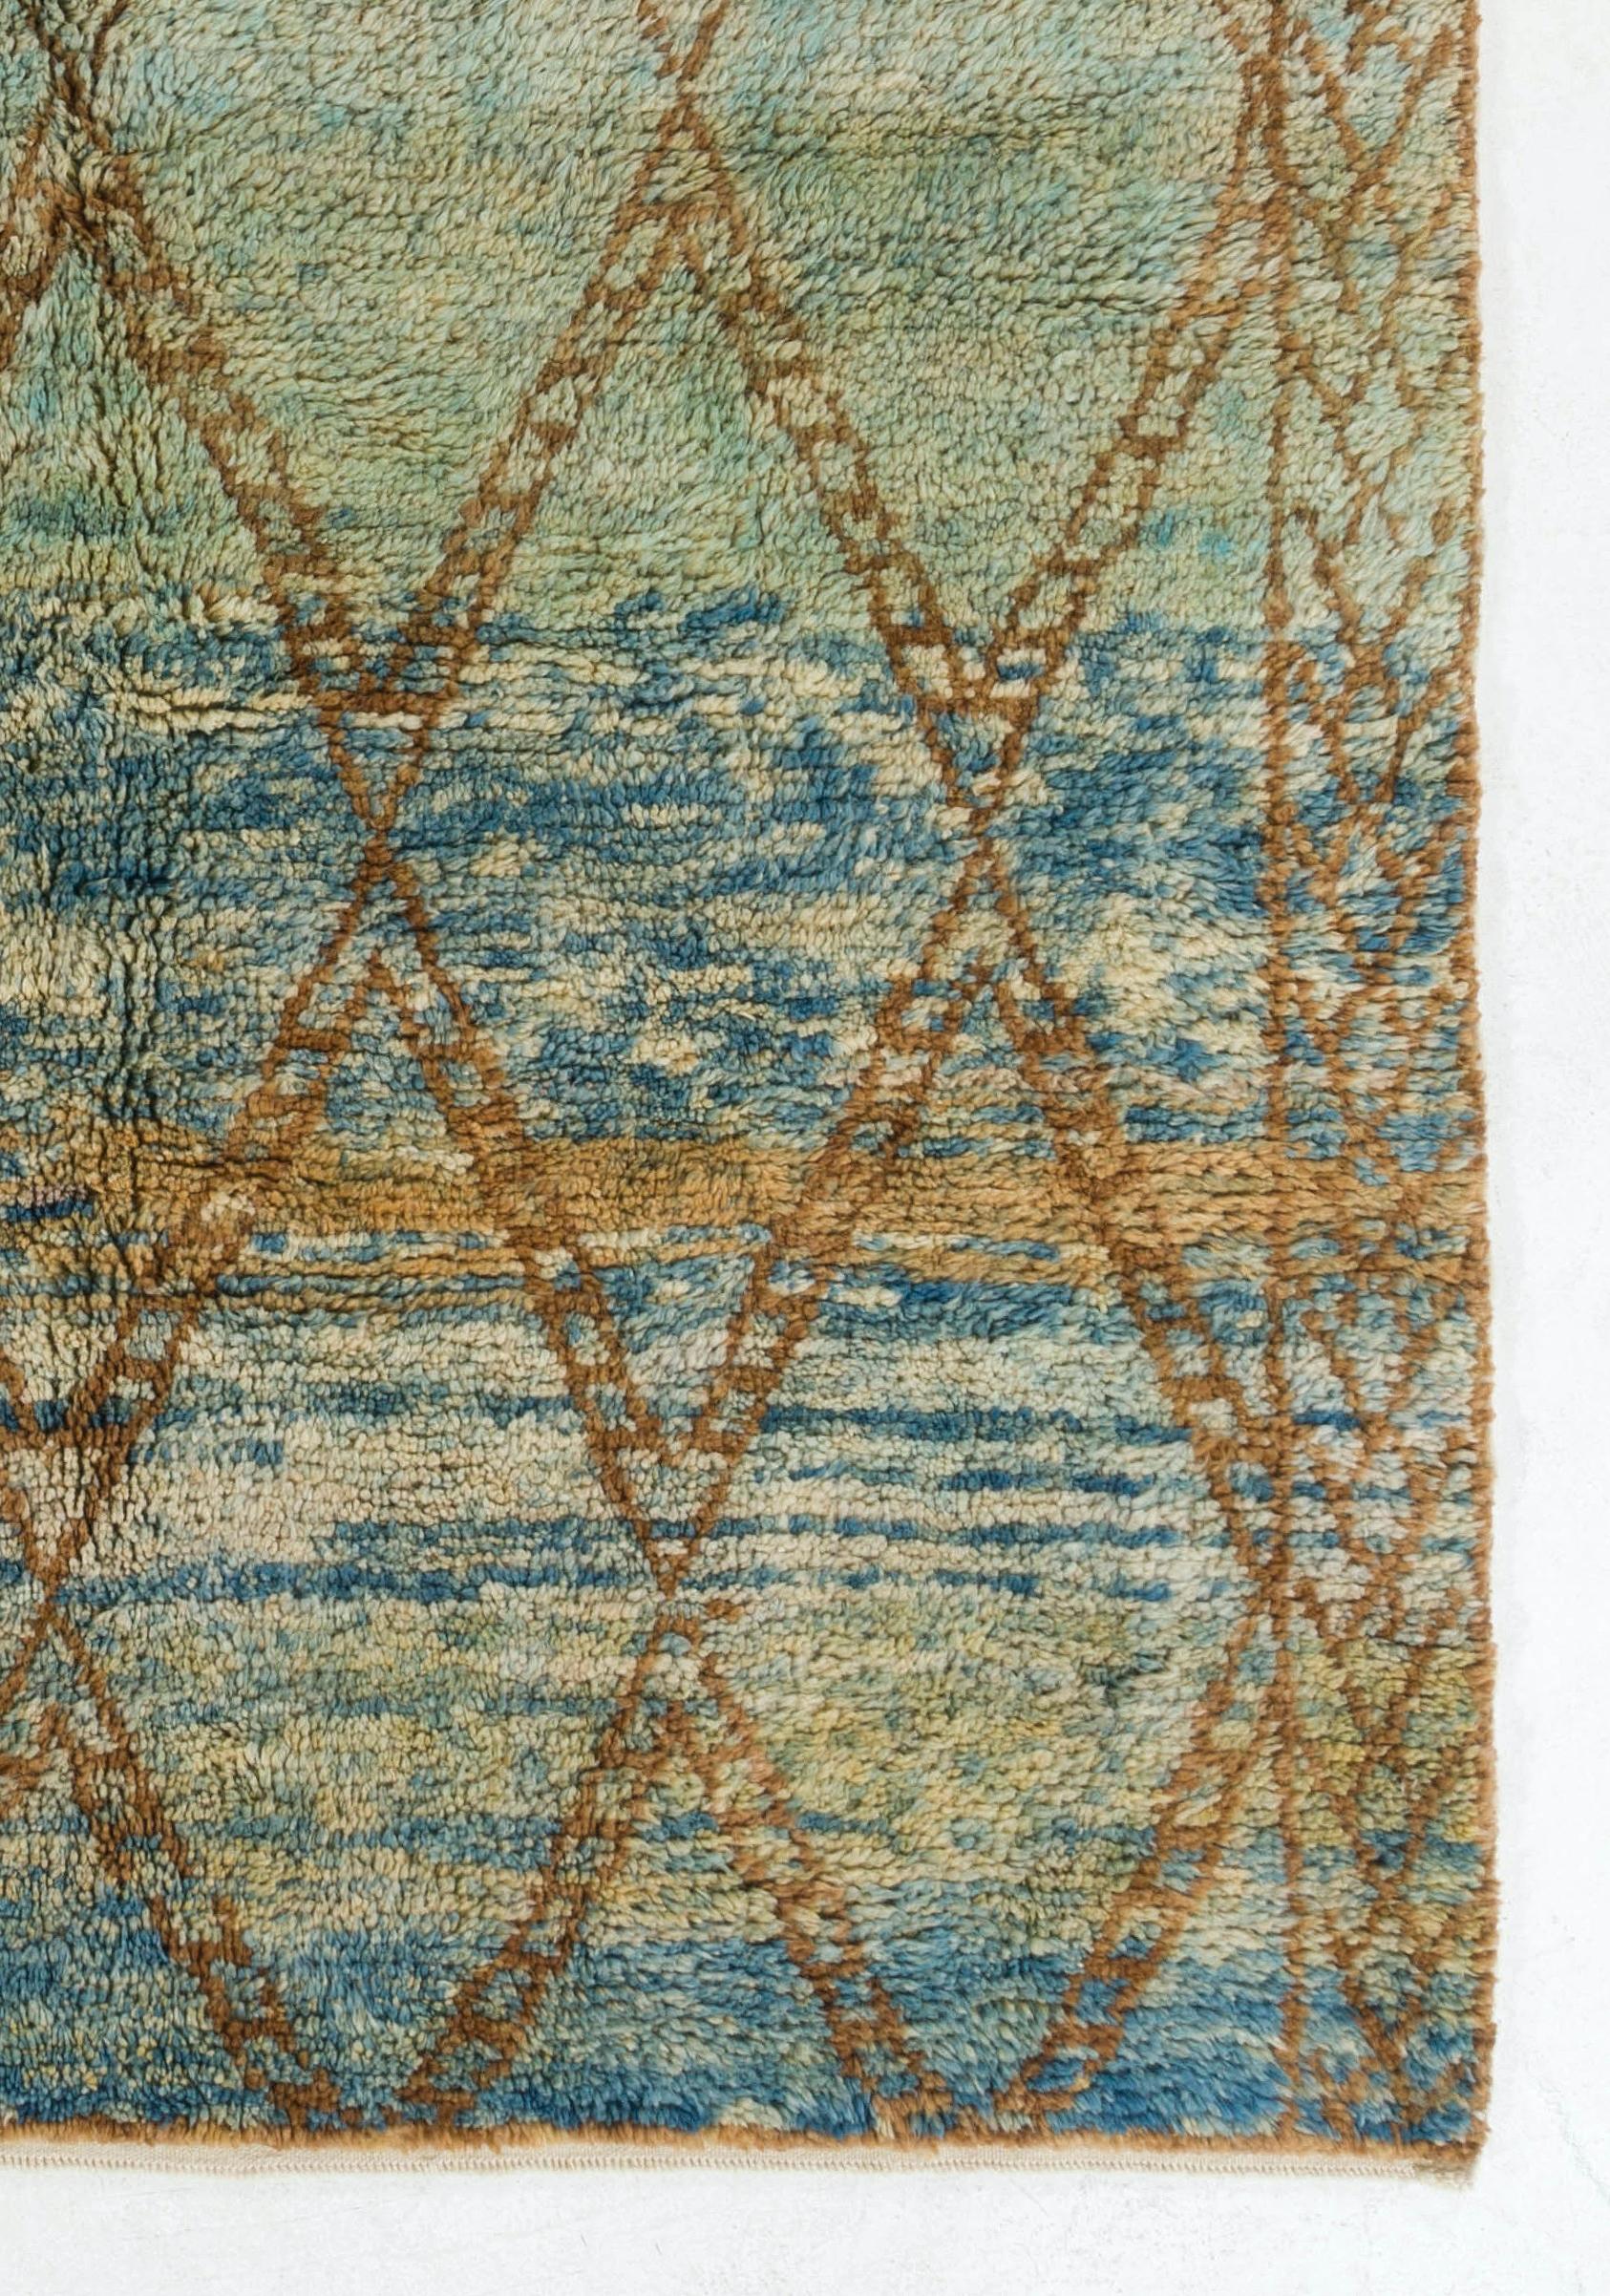 Hand-Knotted 7x10 Ft Modern Moroccan Berber Wool Rug. Hand-knotted in Green, Blue & Brown For Sale